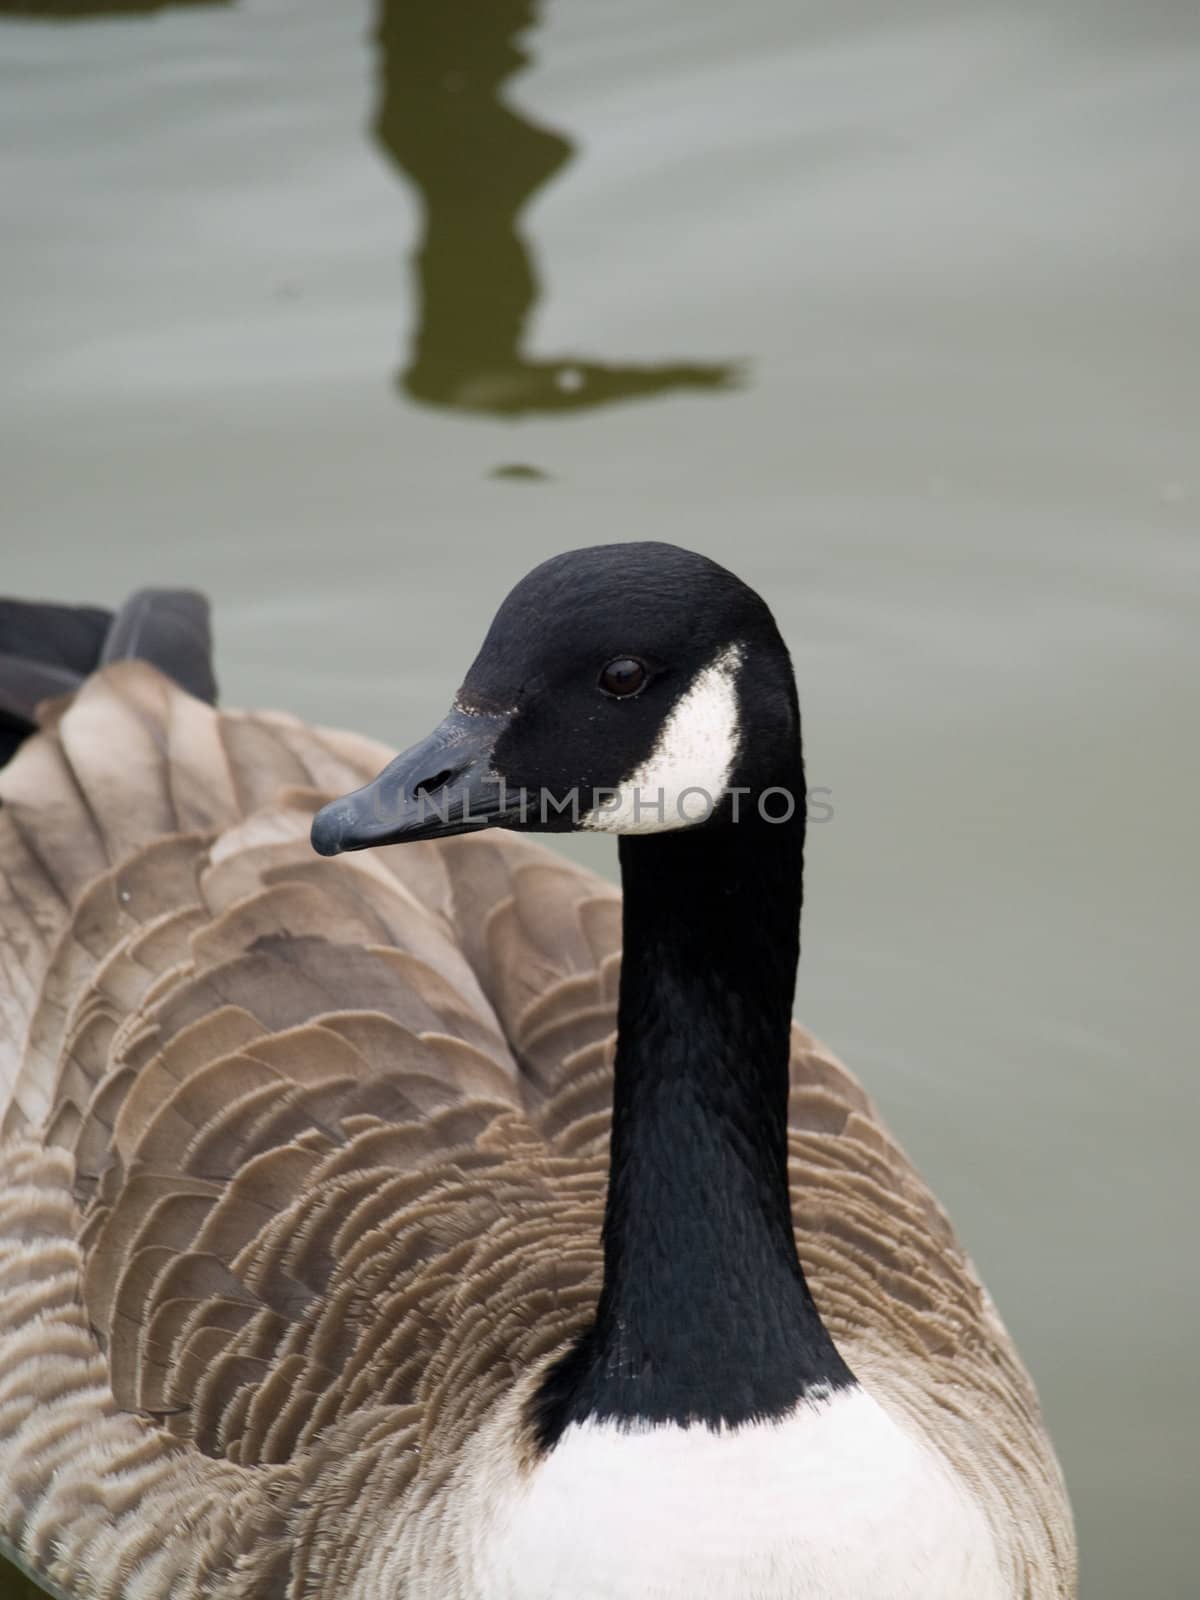 Canada Goose by timbphotography